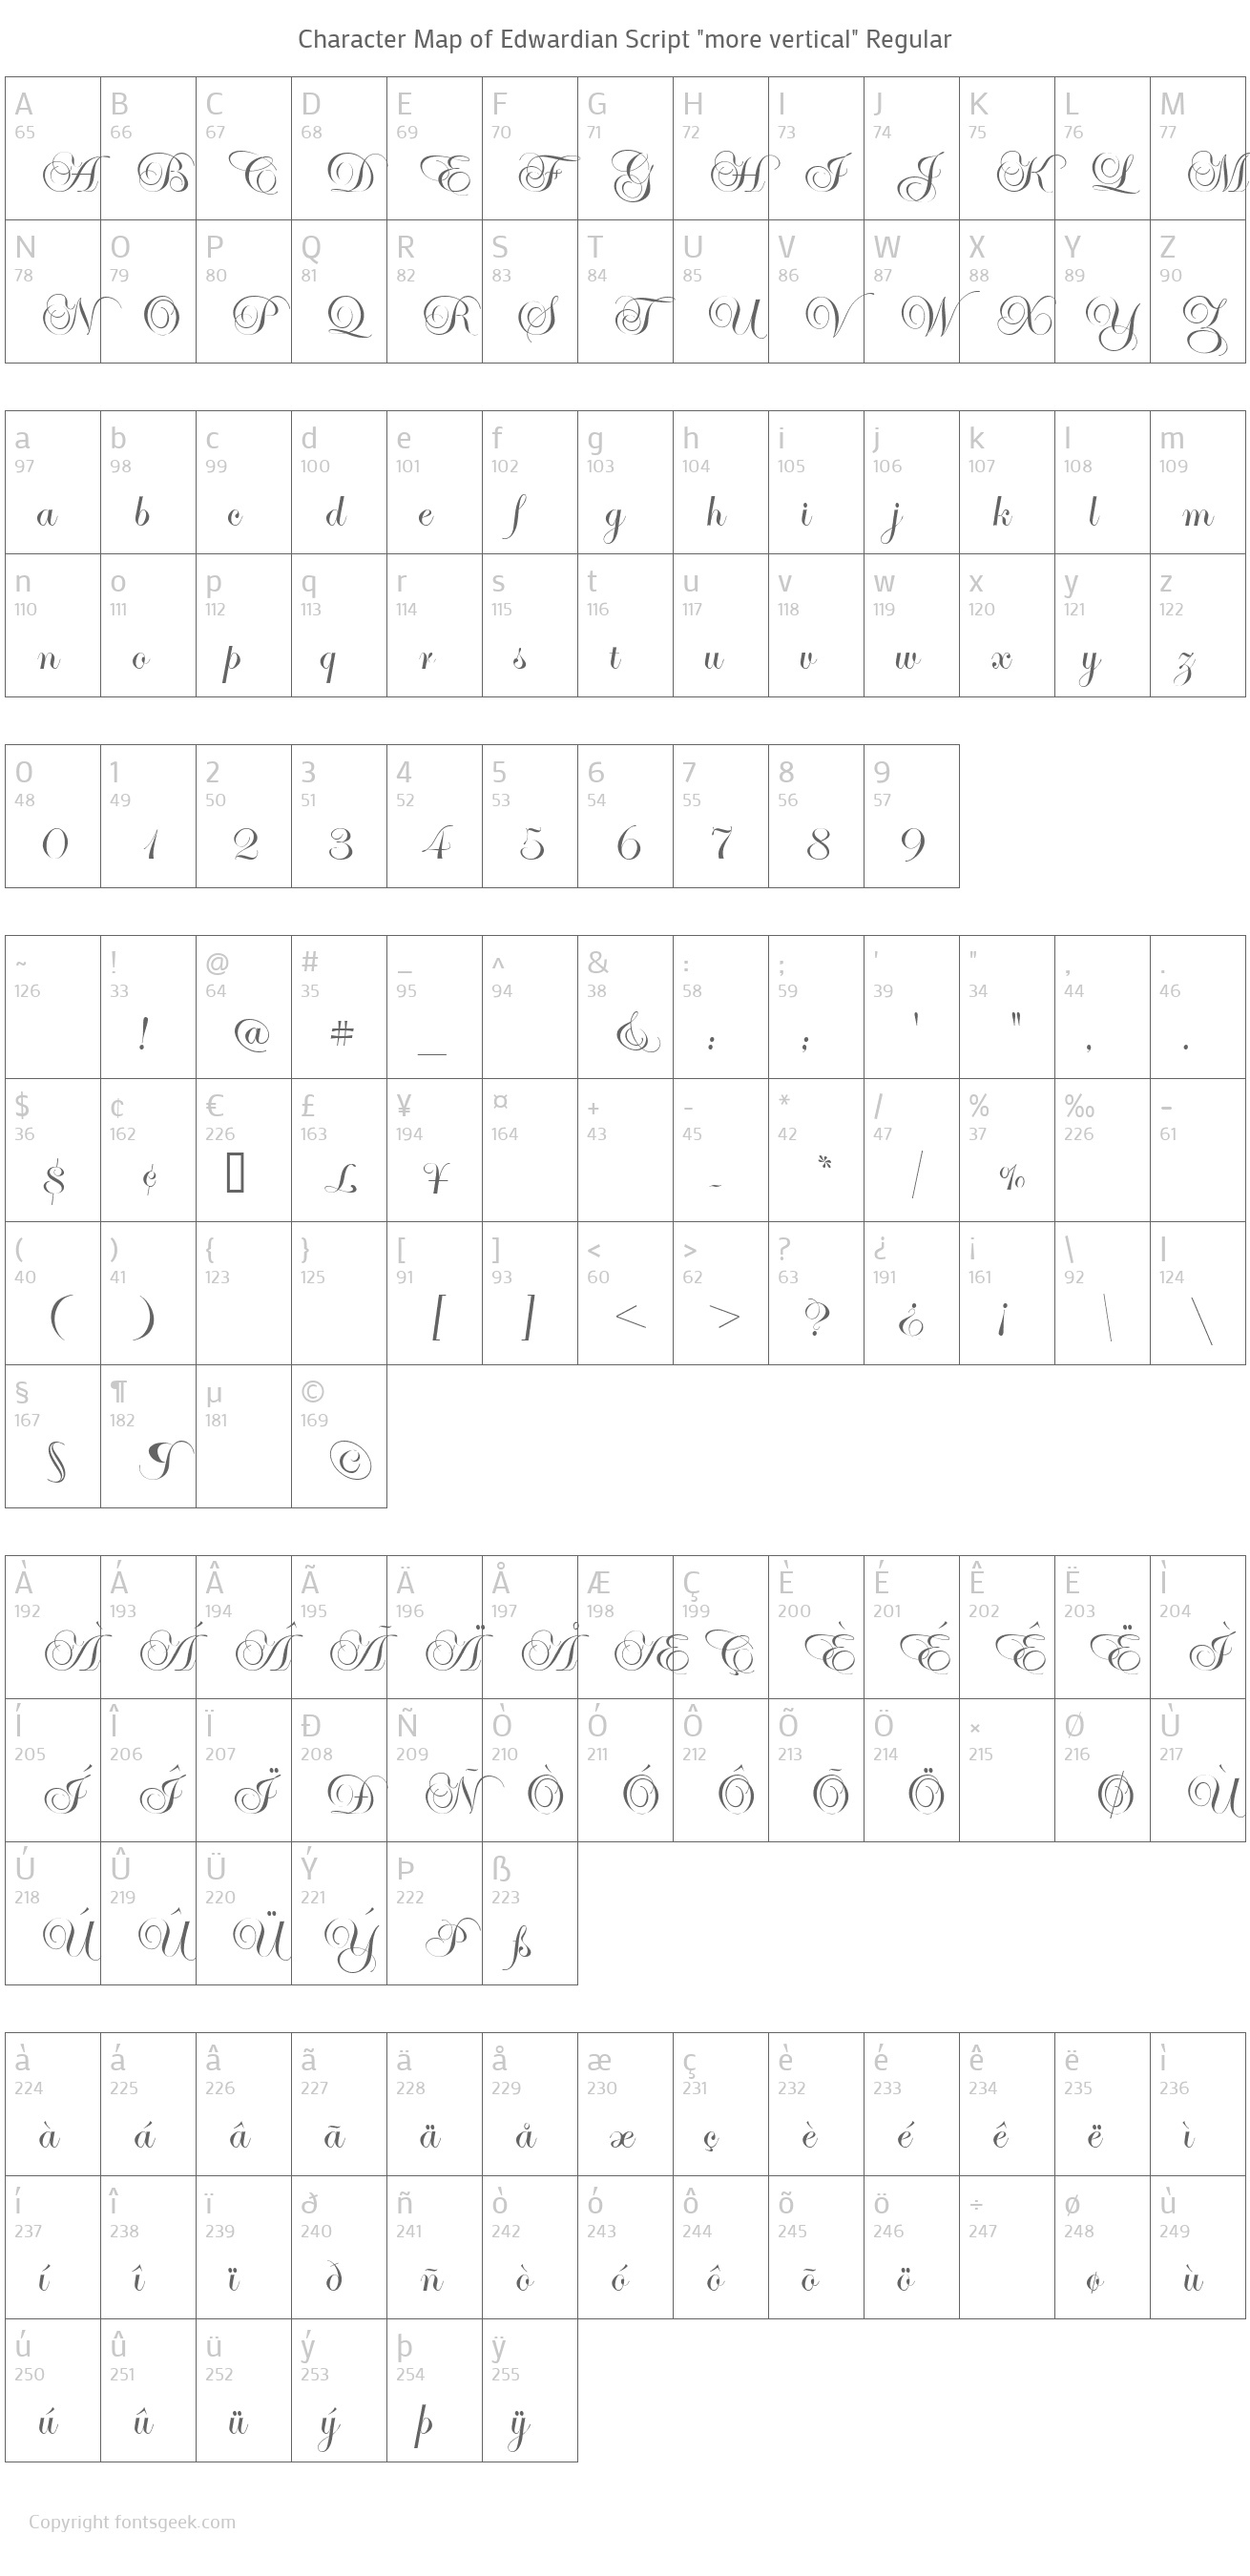 Edwardian Script More Vertical Regular Download For Free View Sample Text Rating And More On Fontsgeek Com